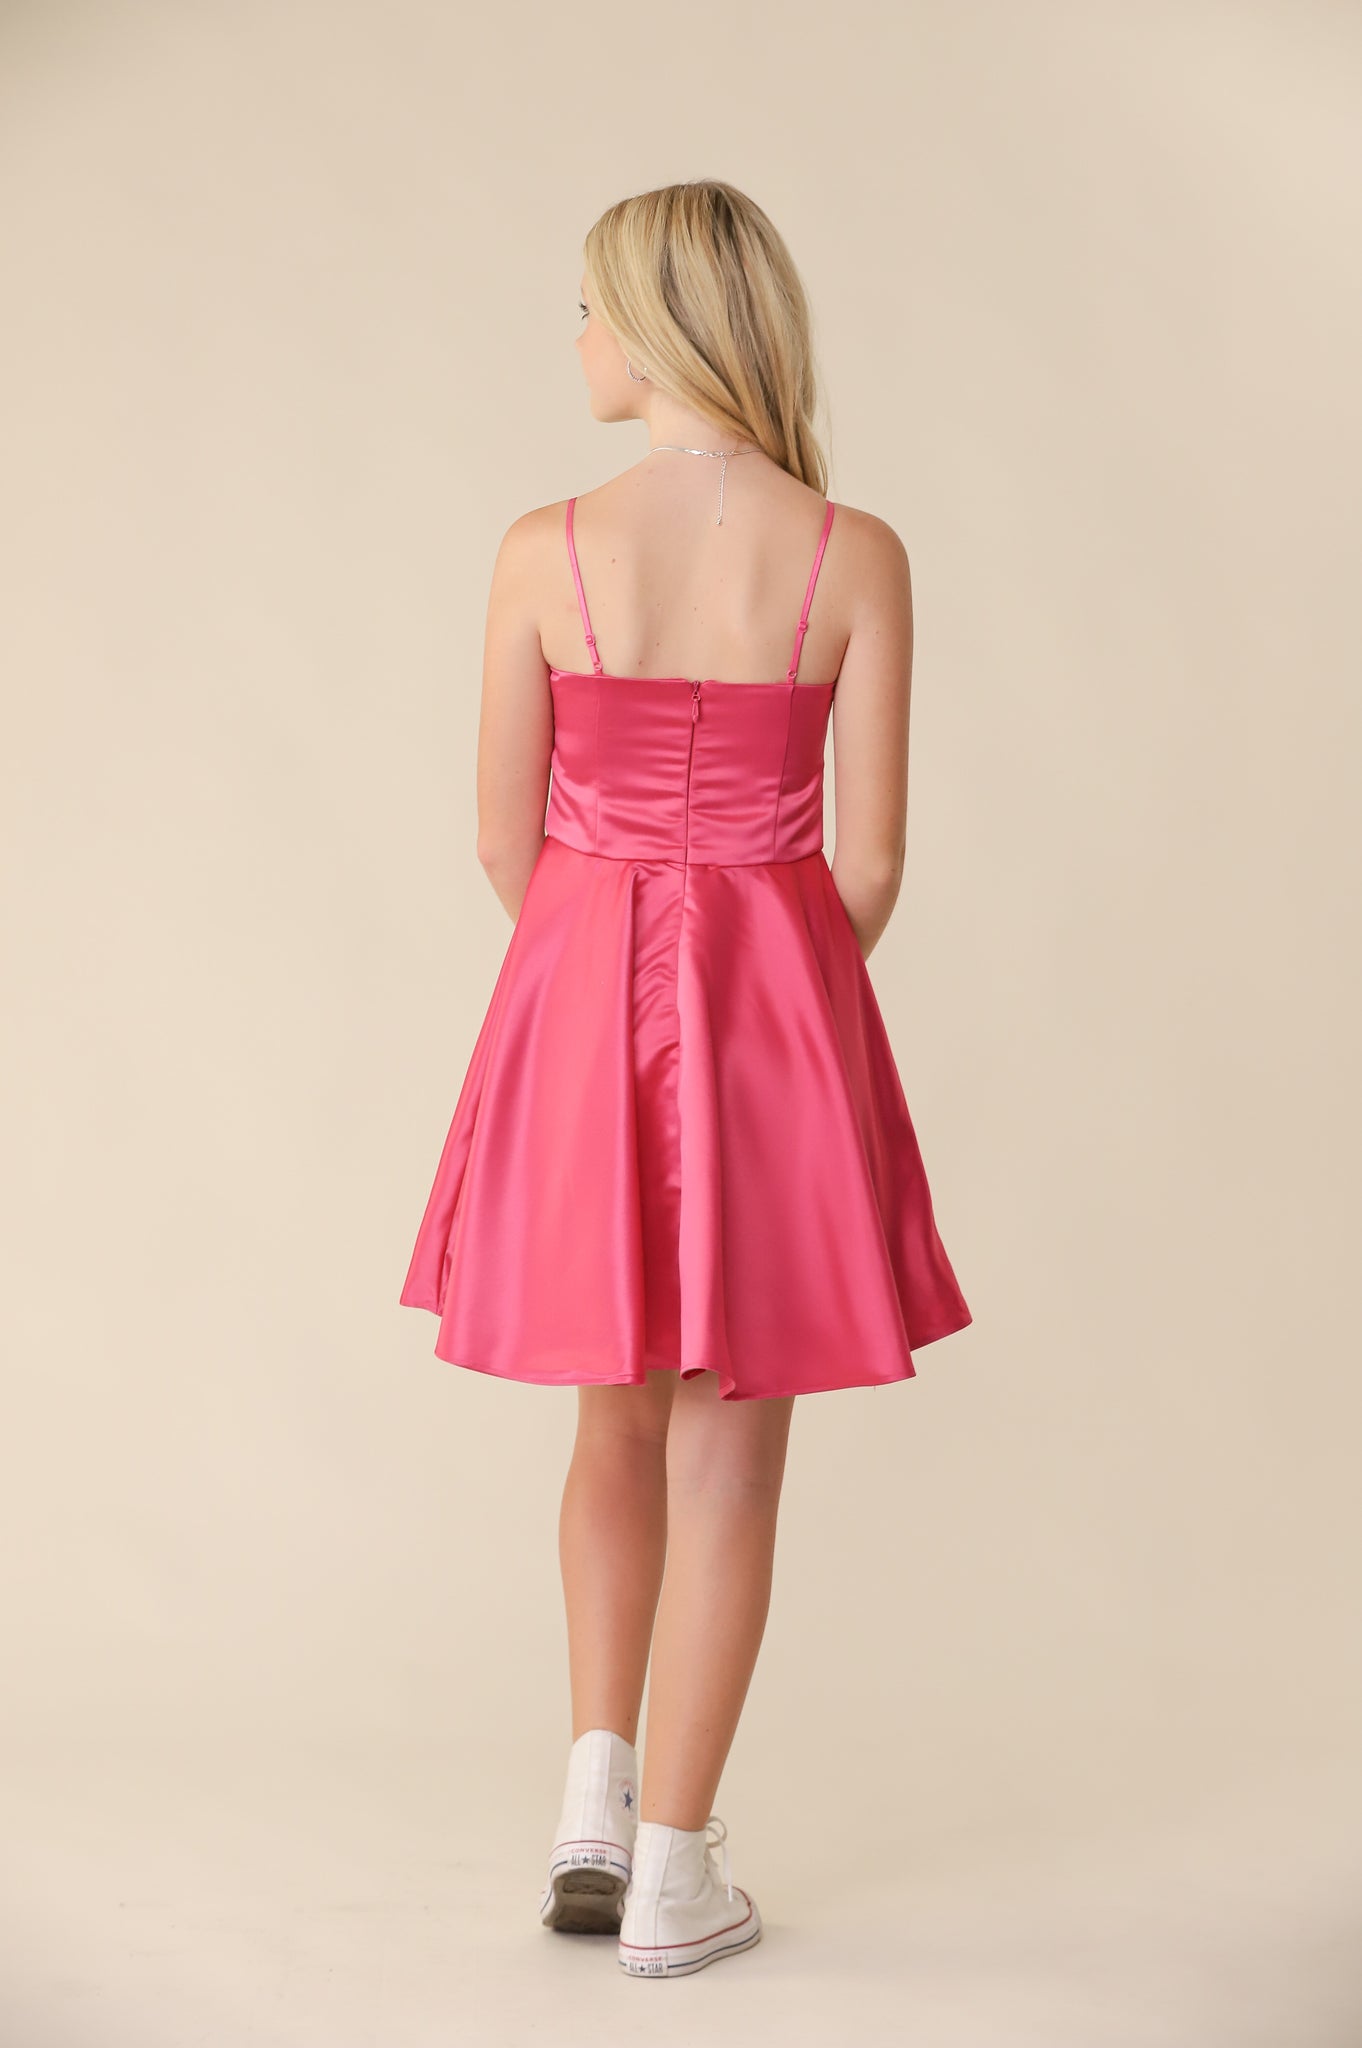 This is an all over, non-stretch satin fabric dress in fuchsia pink. Hits right above the knee for a chic and sophisticated look. It features adjustable straps and full circle skirt.